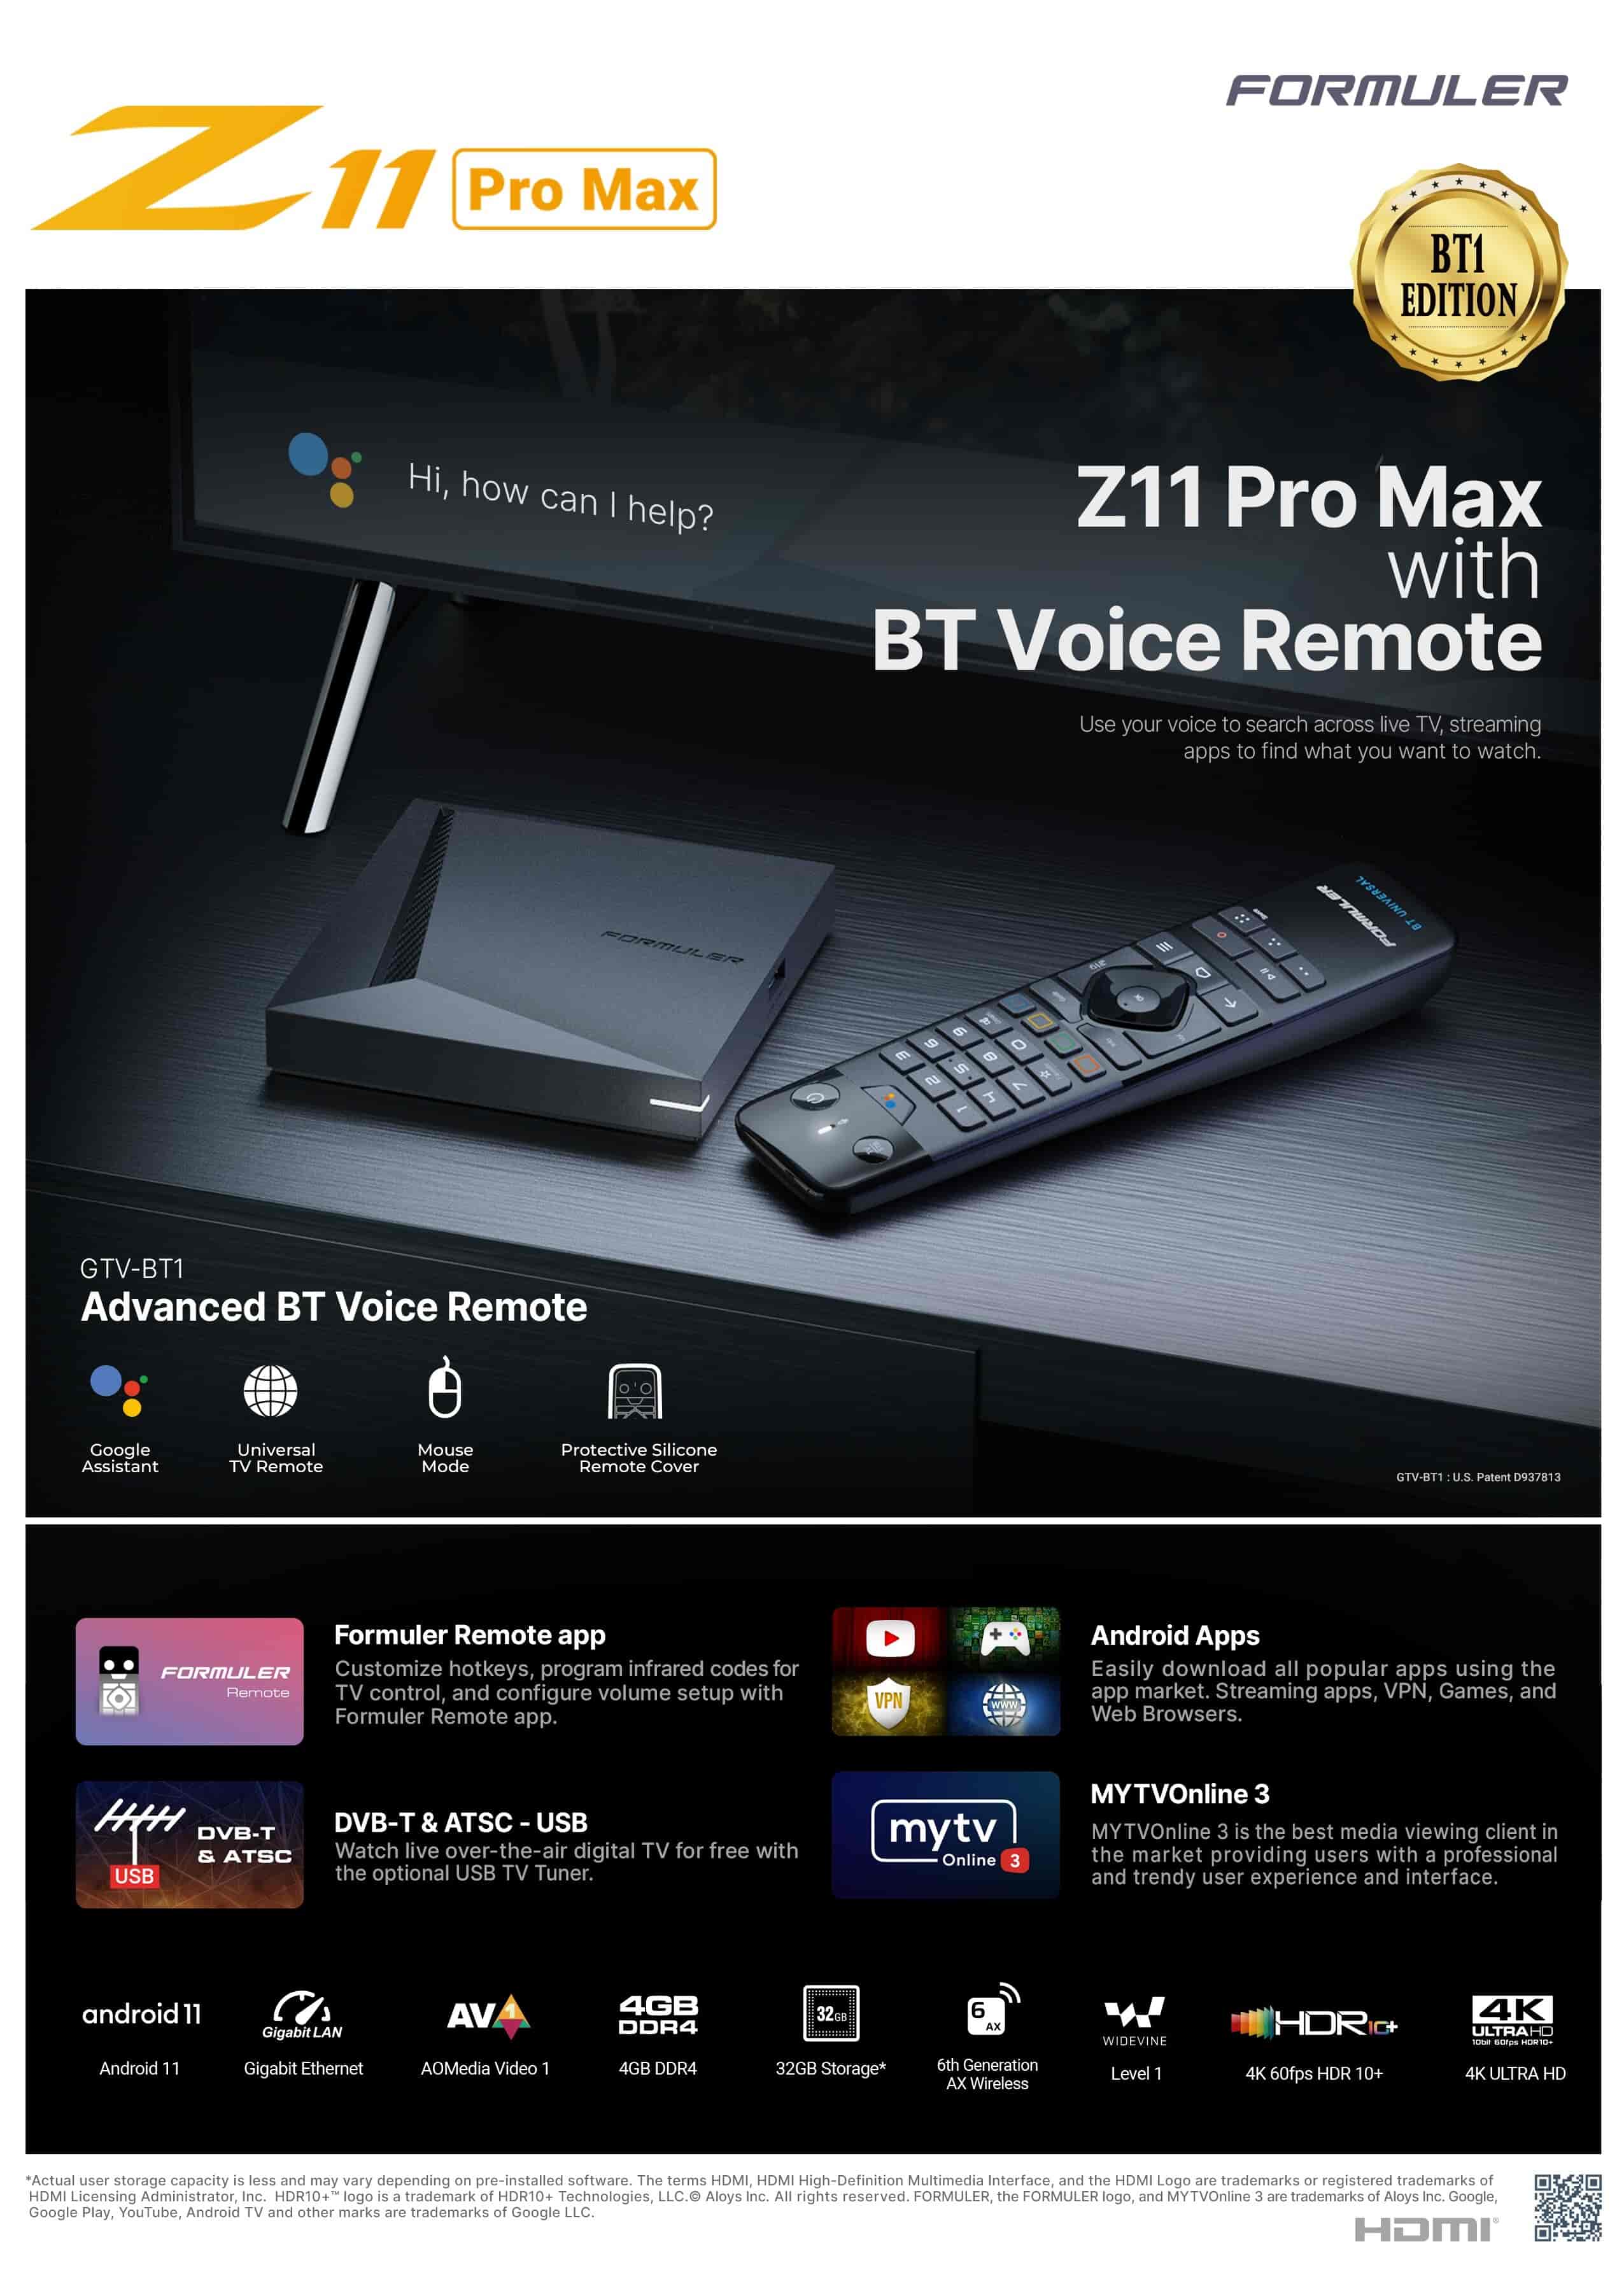 Formuler Z11 Pro Max BT1Formuler Z11 Pro Max BT1 Edition is a powerful 4K smart multimedia IPTV receiver. The Formula Z11 Pro 4K runs on the Android 11 operating system and brings some new features such as MYTVOnline 3 Media Viewing Client, Wifi 6, 1GB LAN and its RealTek RTD1319C CPU. The Z11 Pro Max BT1 Edition also has a Mali-G57 MC1 GPU, as well as 4 GB DDR4 RAM memory and 32 GB eMMC Flash. The storage space can be easily and conveniently expanded using a micro SD card. HDR compatibility allows you to receive a larger color spectrum and therefore reproduce very realistic color images. The dual-band 2x2 AC WiFi module can also play internet content. This exclusive BT1 version of the Formuler Z11 Pro Max is not just an upgrade, it is a technological leap that sets a new standard for streaming devices.Formuler